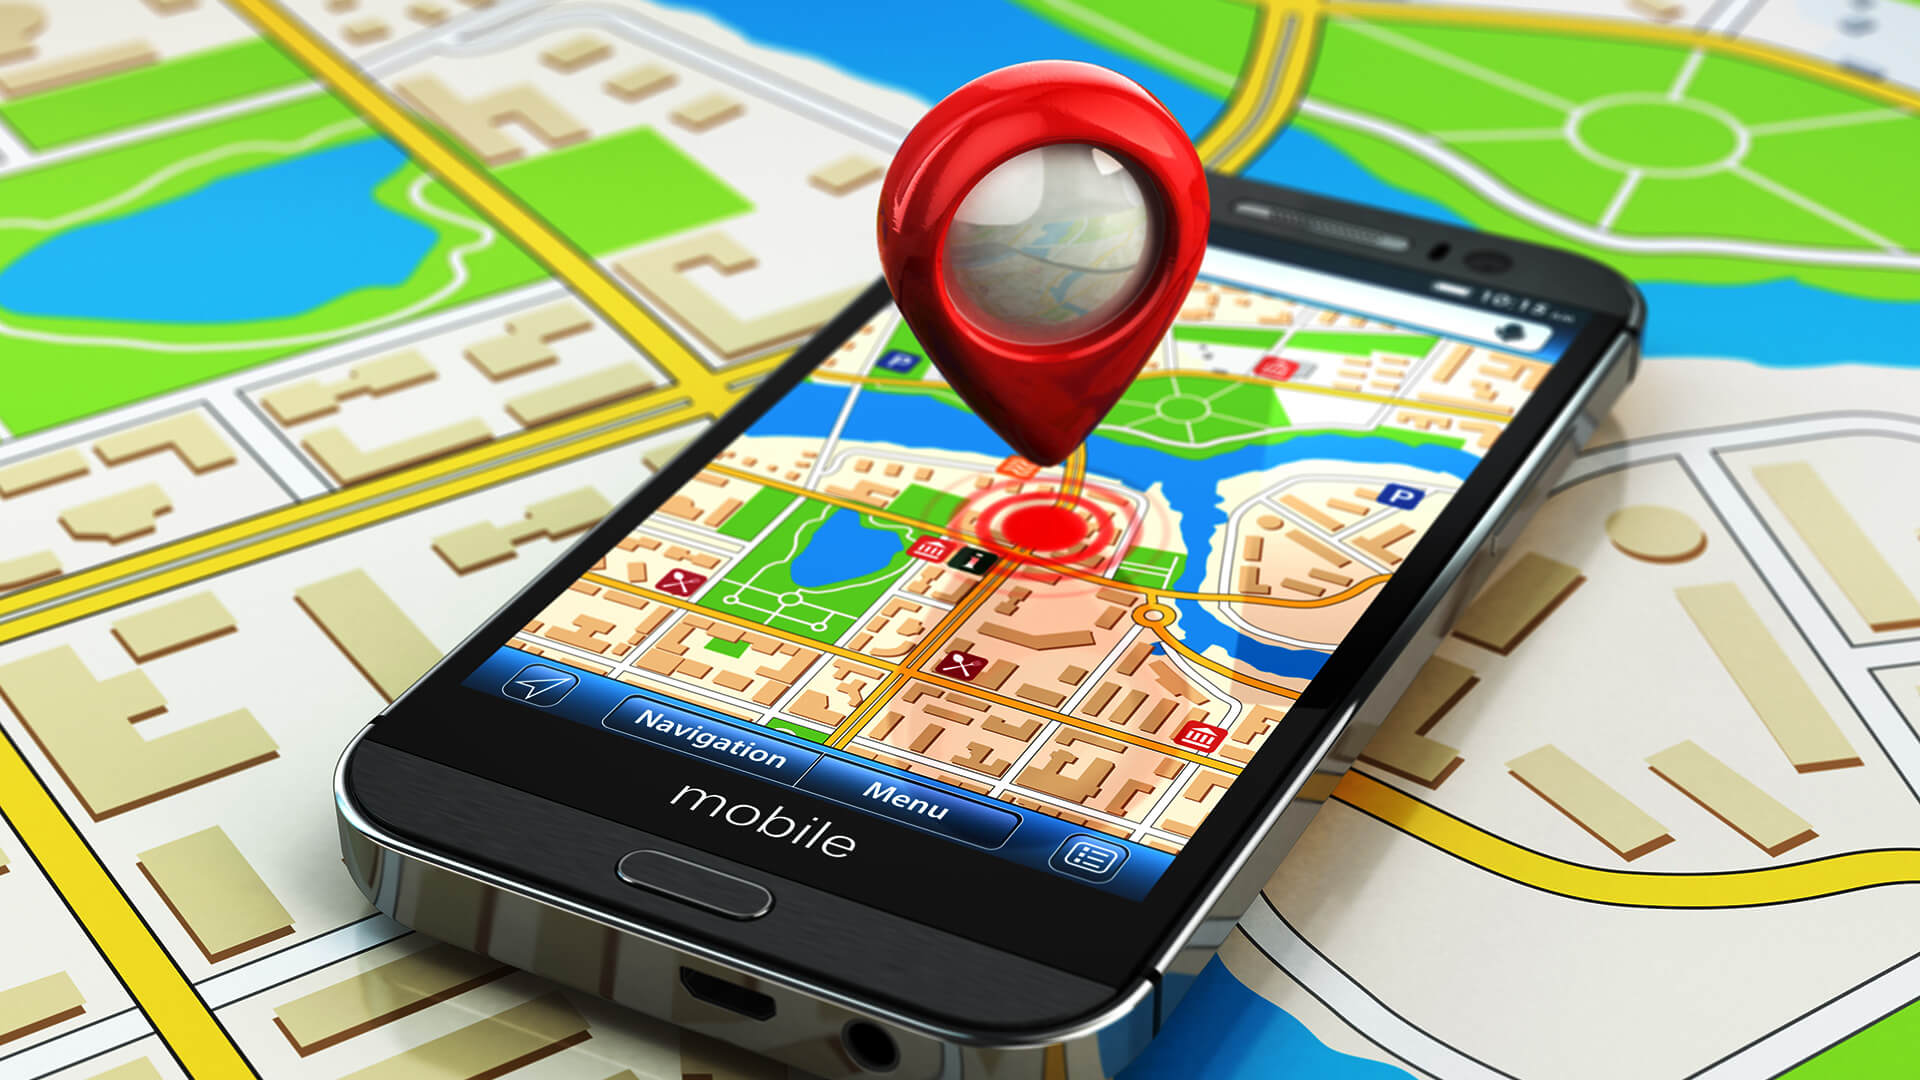 mobile-maps-smartphone-location-pin-business-ss-1920